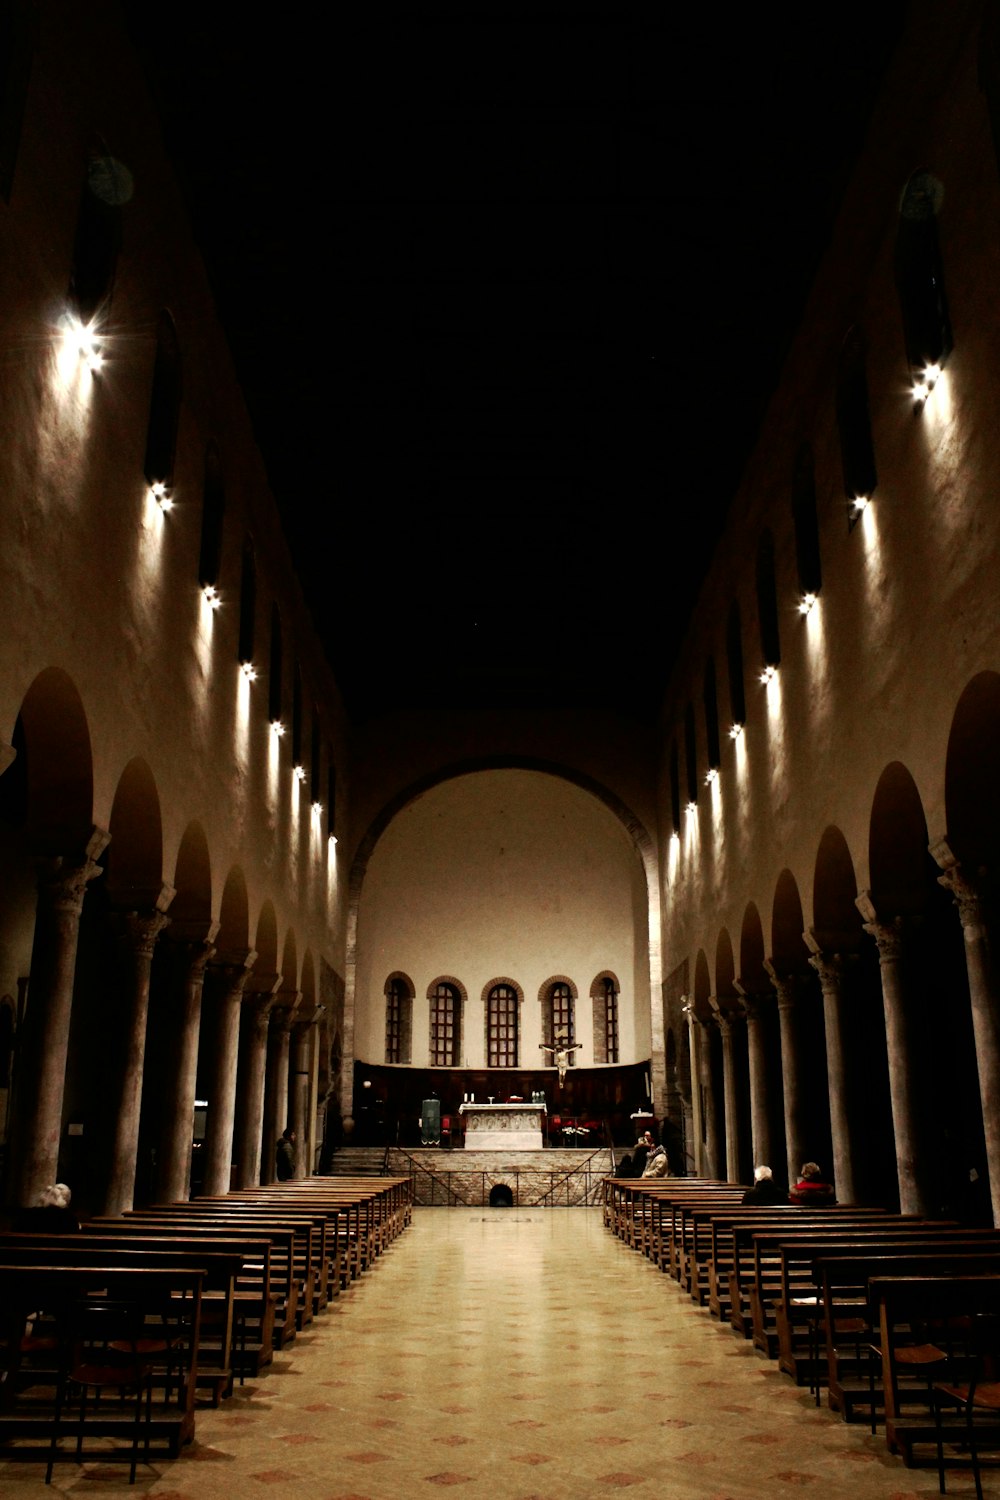 an empty church with rows of pews and lights